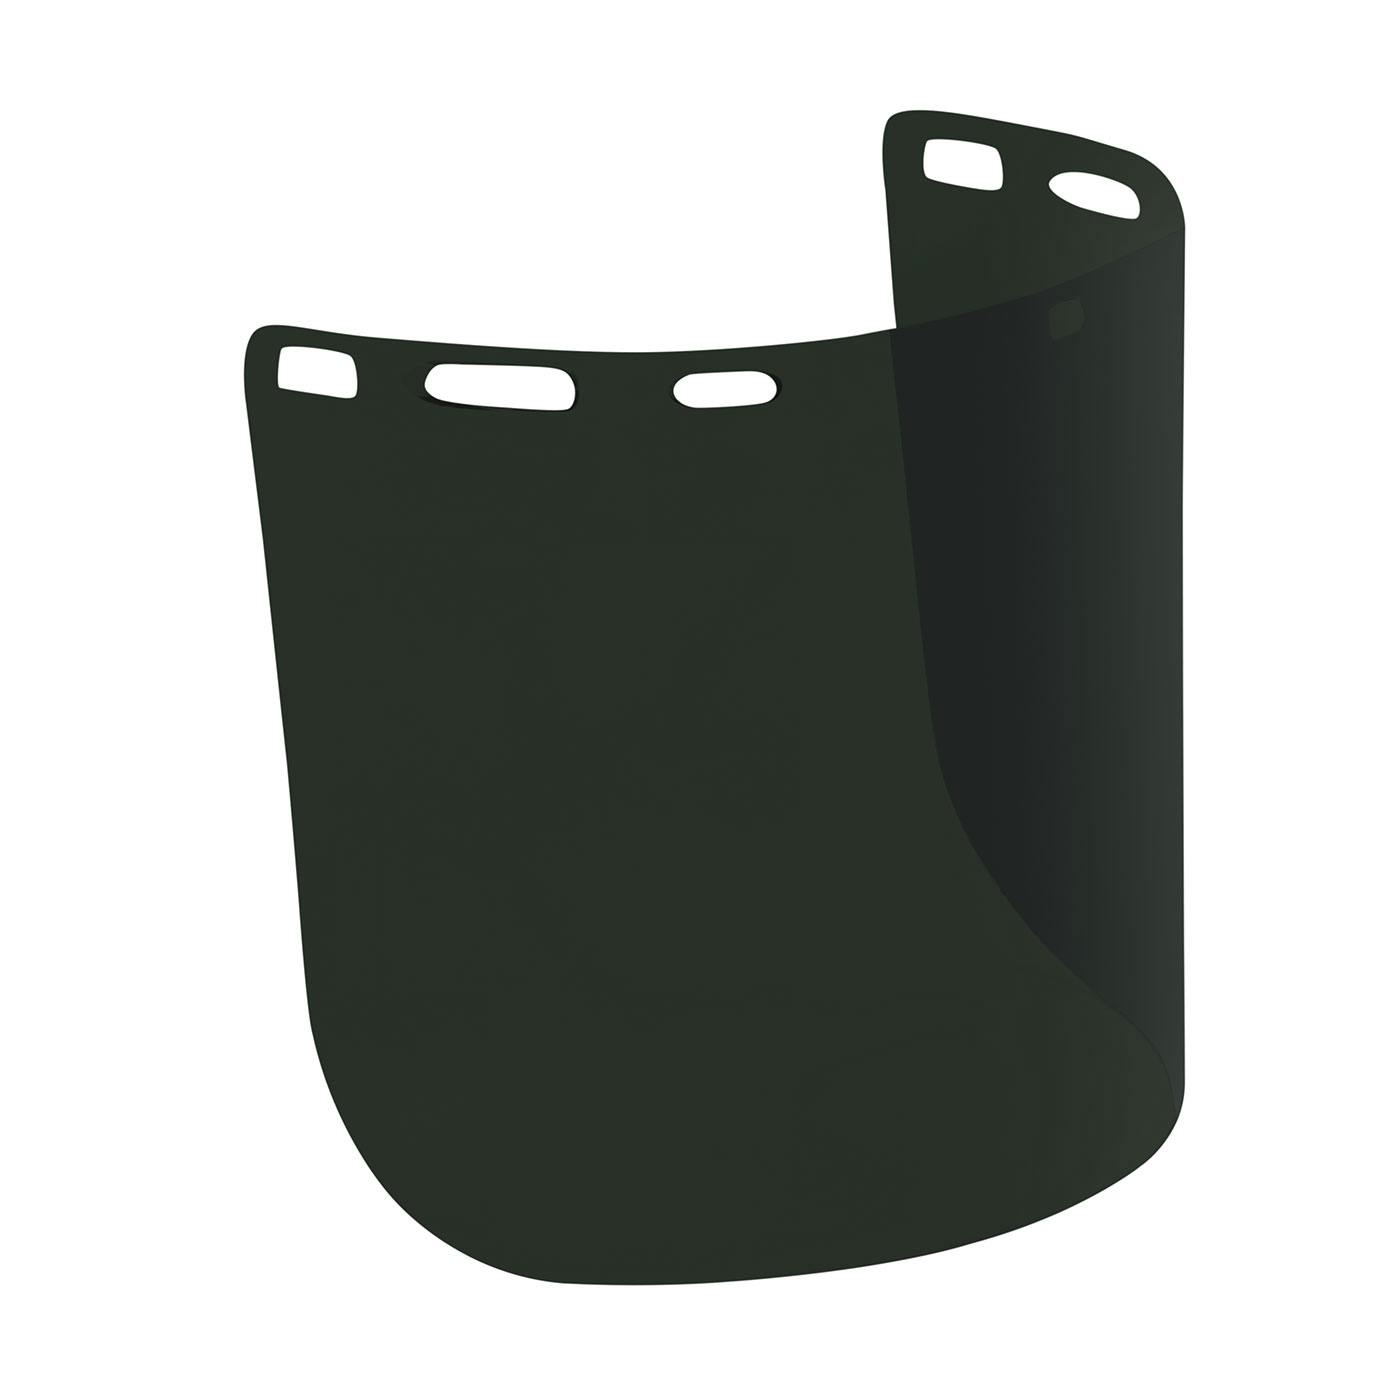 Uncoated Polycarbonate Safety Visor - IR 5.0, Green (251-01-7315) - OS_1